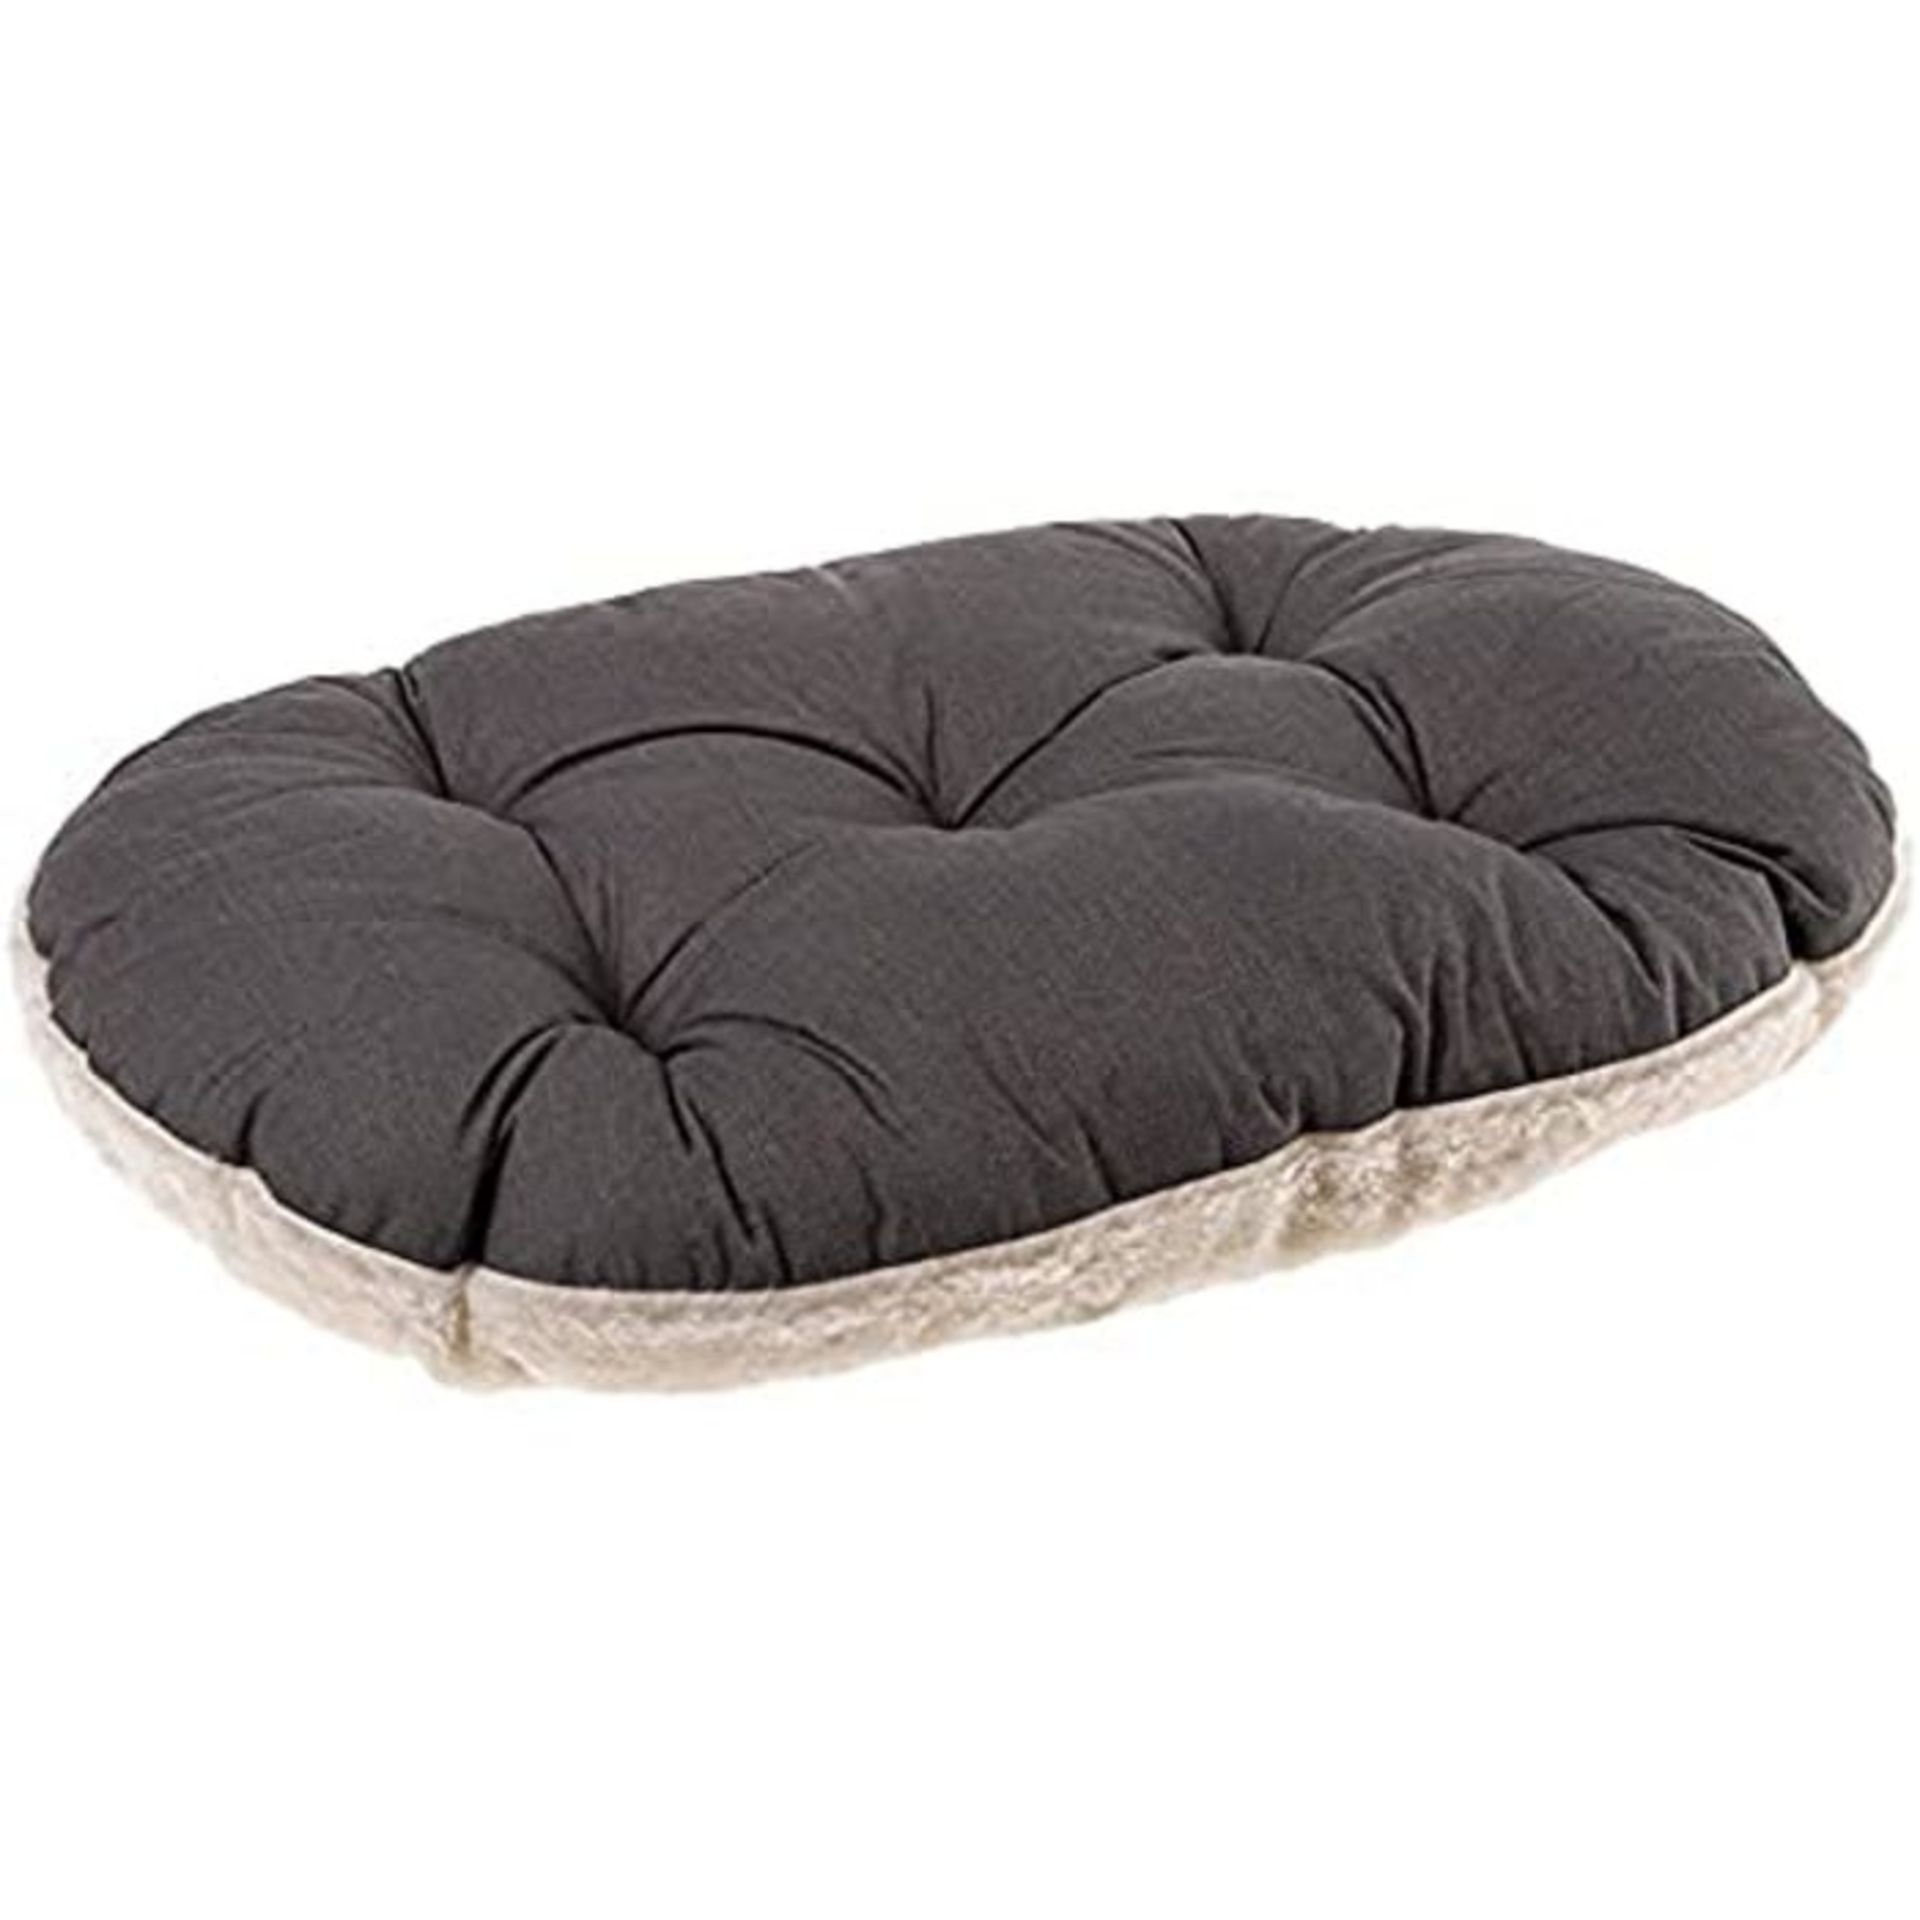 Ferplast Relax F 55/4 Cat and Dog Bed, Cotton/Fur, 55 x 36 cm, Grey/Beige - Image 3 of 4